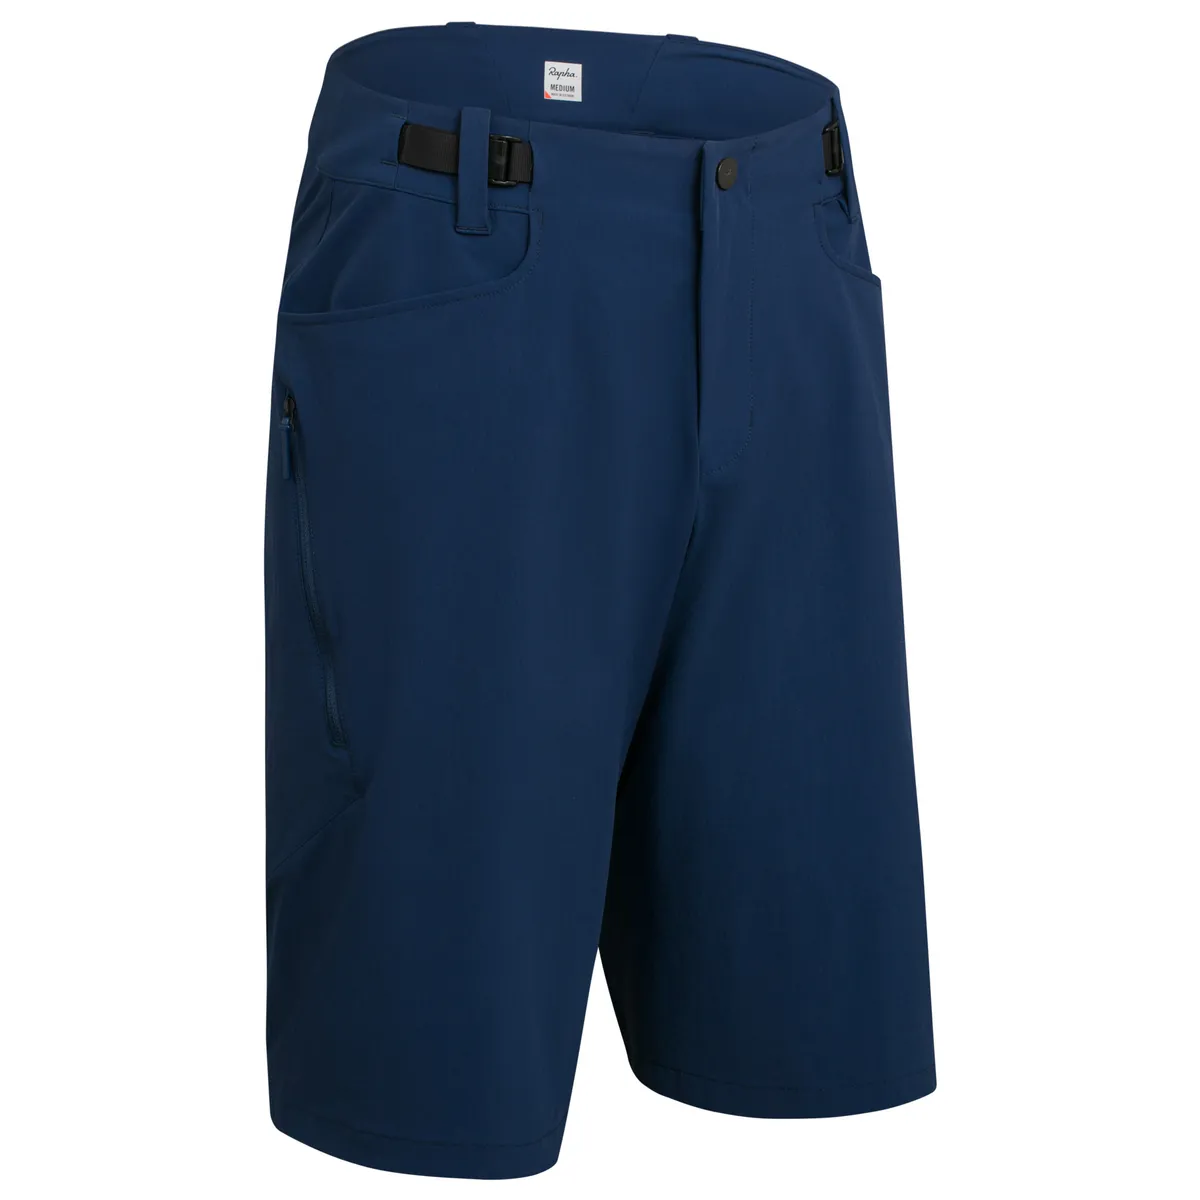 Rapha Trail Shorts in Pageant Blue, Scarlet Ibis